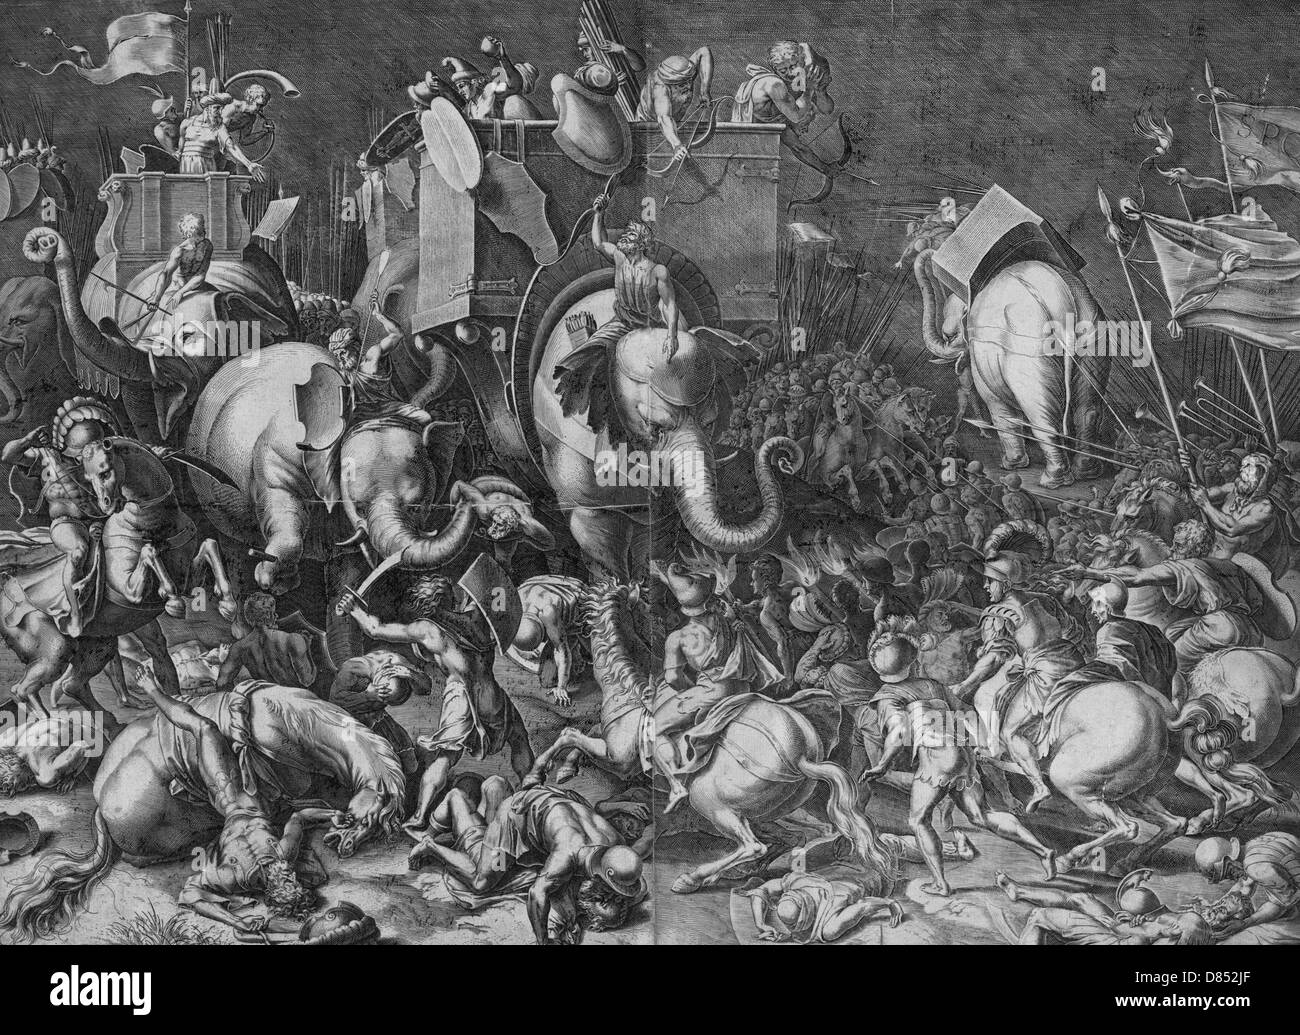 The Battle of Zama, October, 202 BC between Hannibal and Rome  Scipio Africanus on horseback with Roman soldiers engaging Hannibal, riding a war elephant, during the battle of Zama. Stock Photo